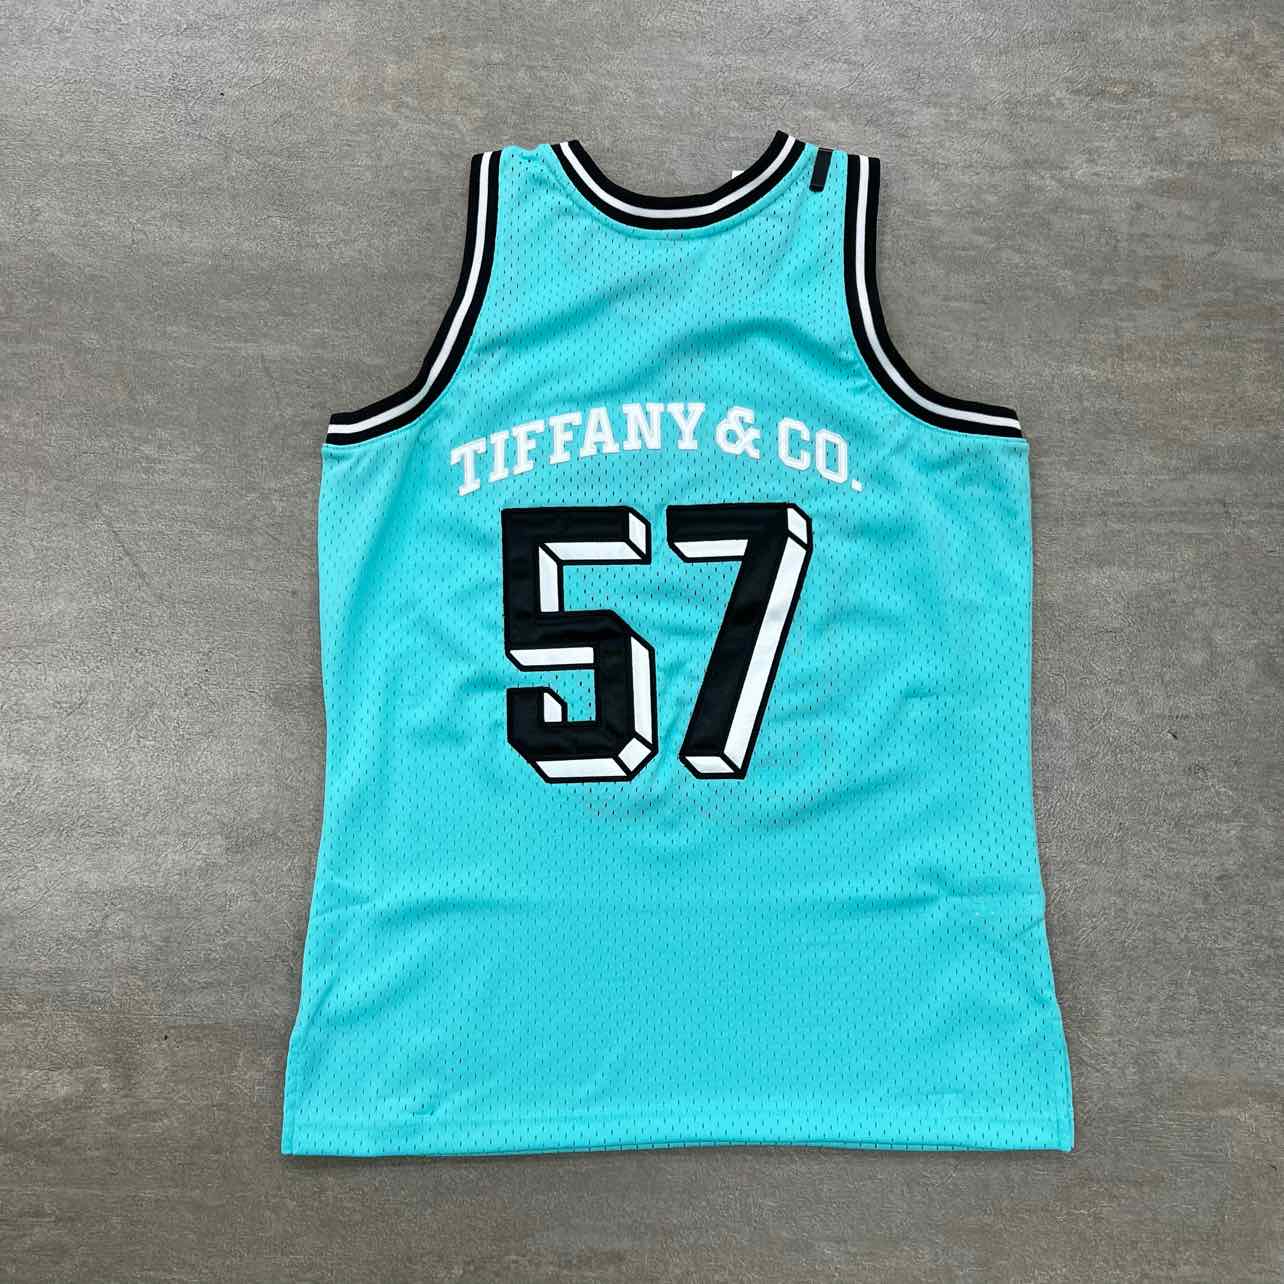 Tiffany &amp; Co. Jersey &quot;MITCHELL &amp; NESS&quot; Teal New Size M